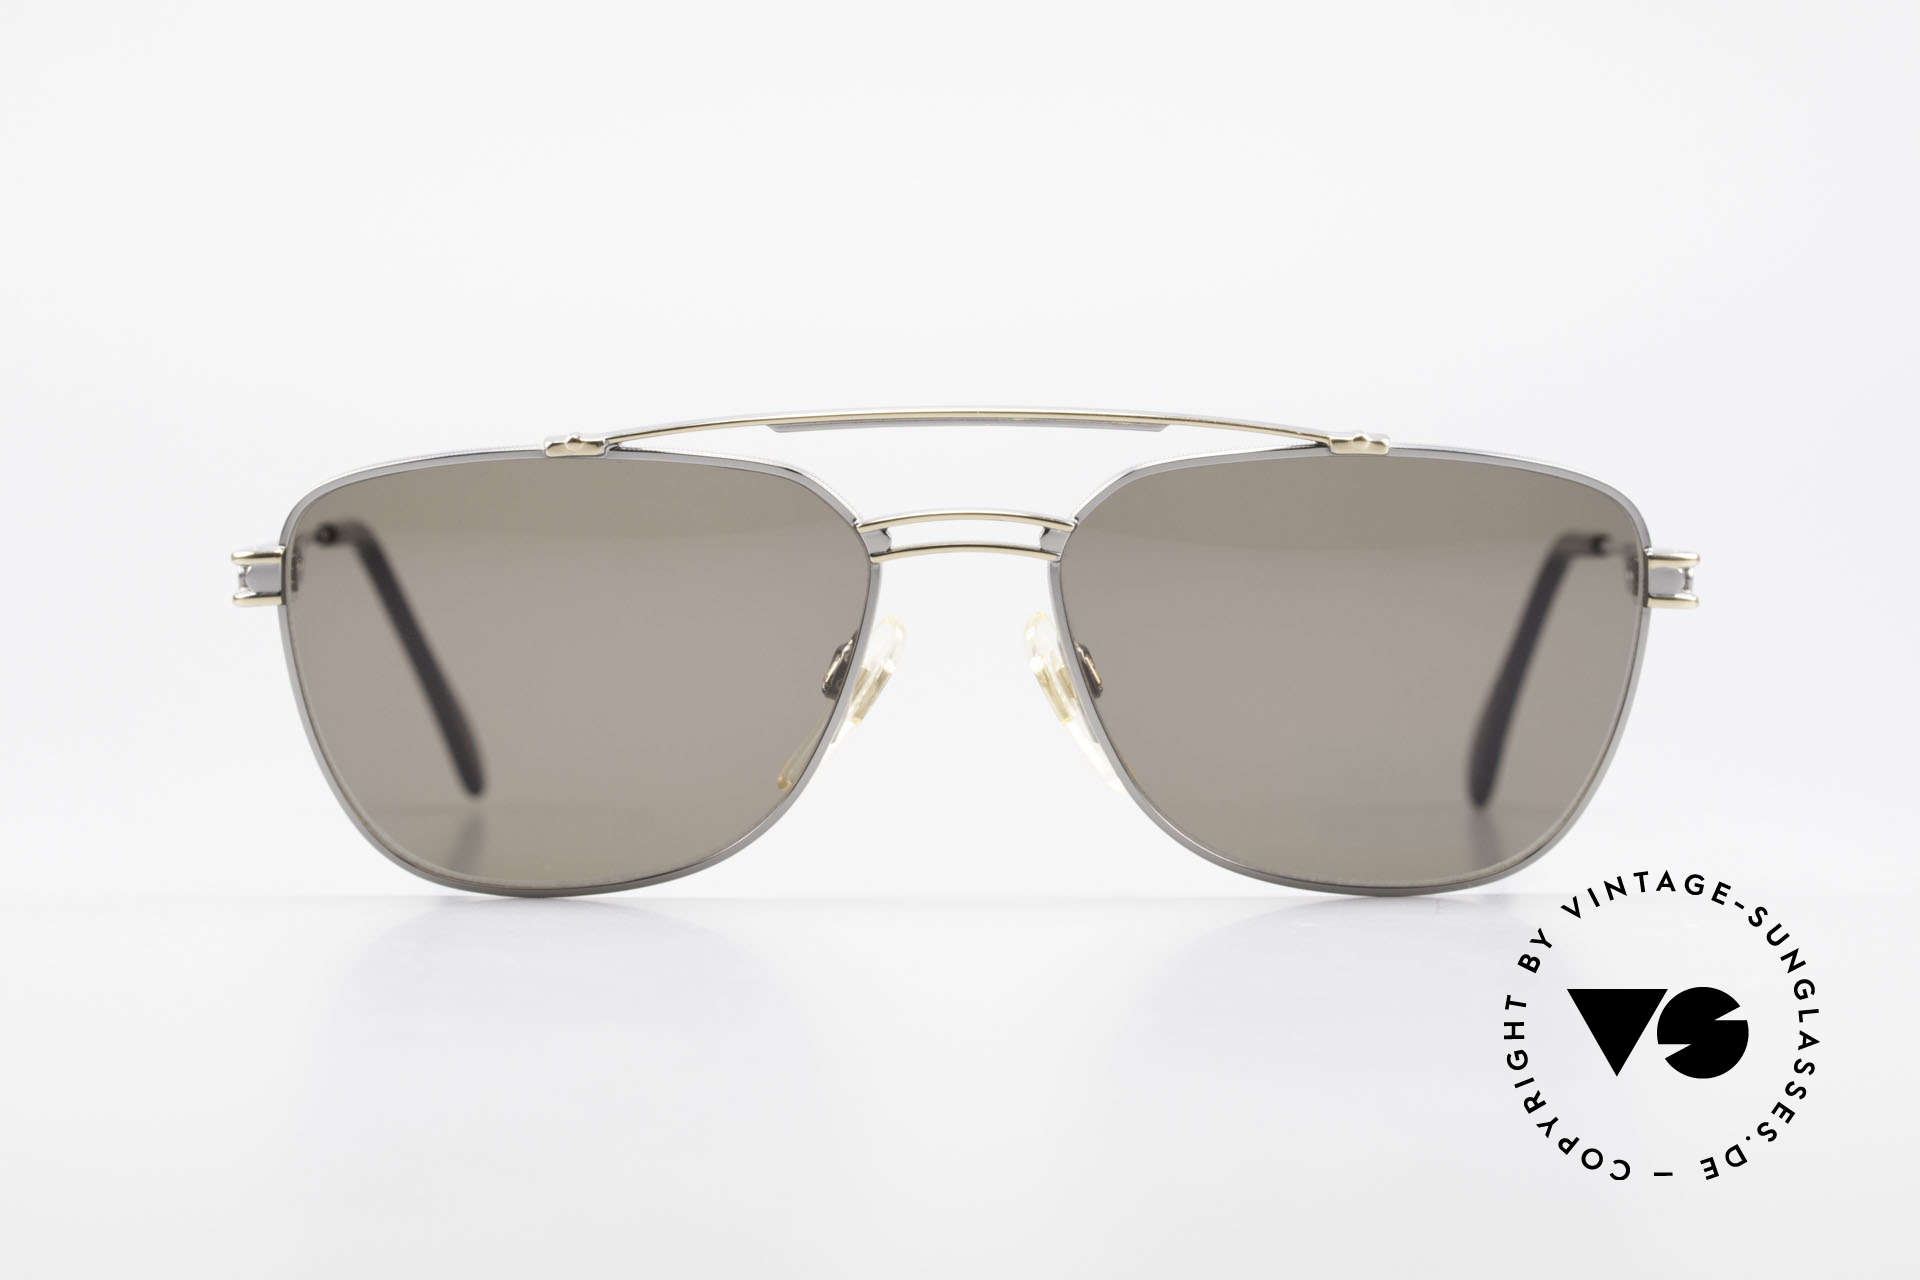 Davidoff 708 Classic Men's Sunglasses, down-to-earth handicraft of an old era; true VINTAGE!, Made for Men